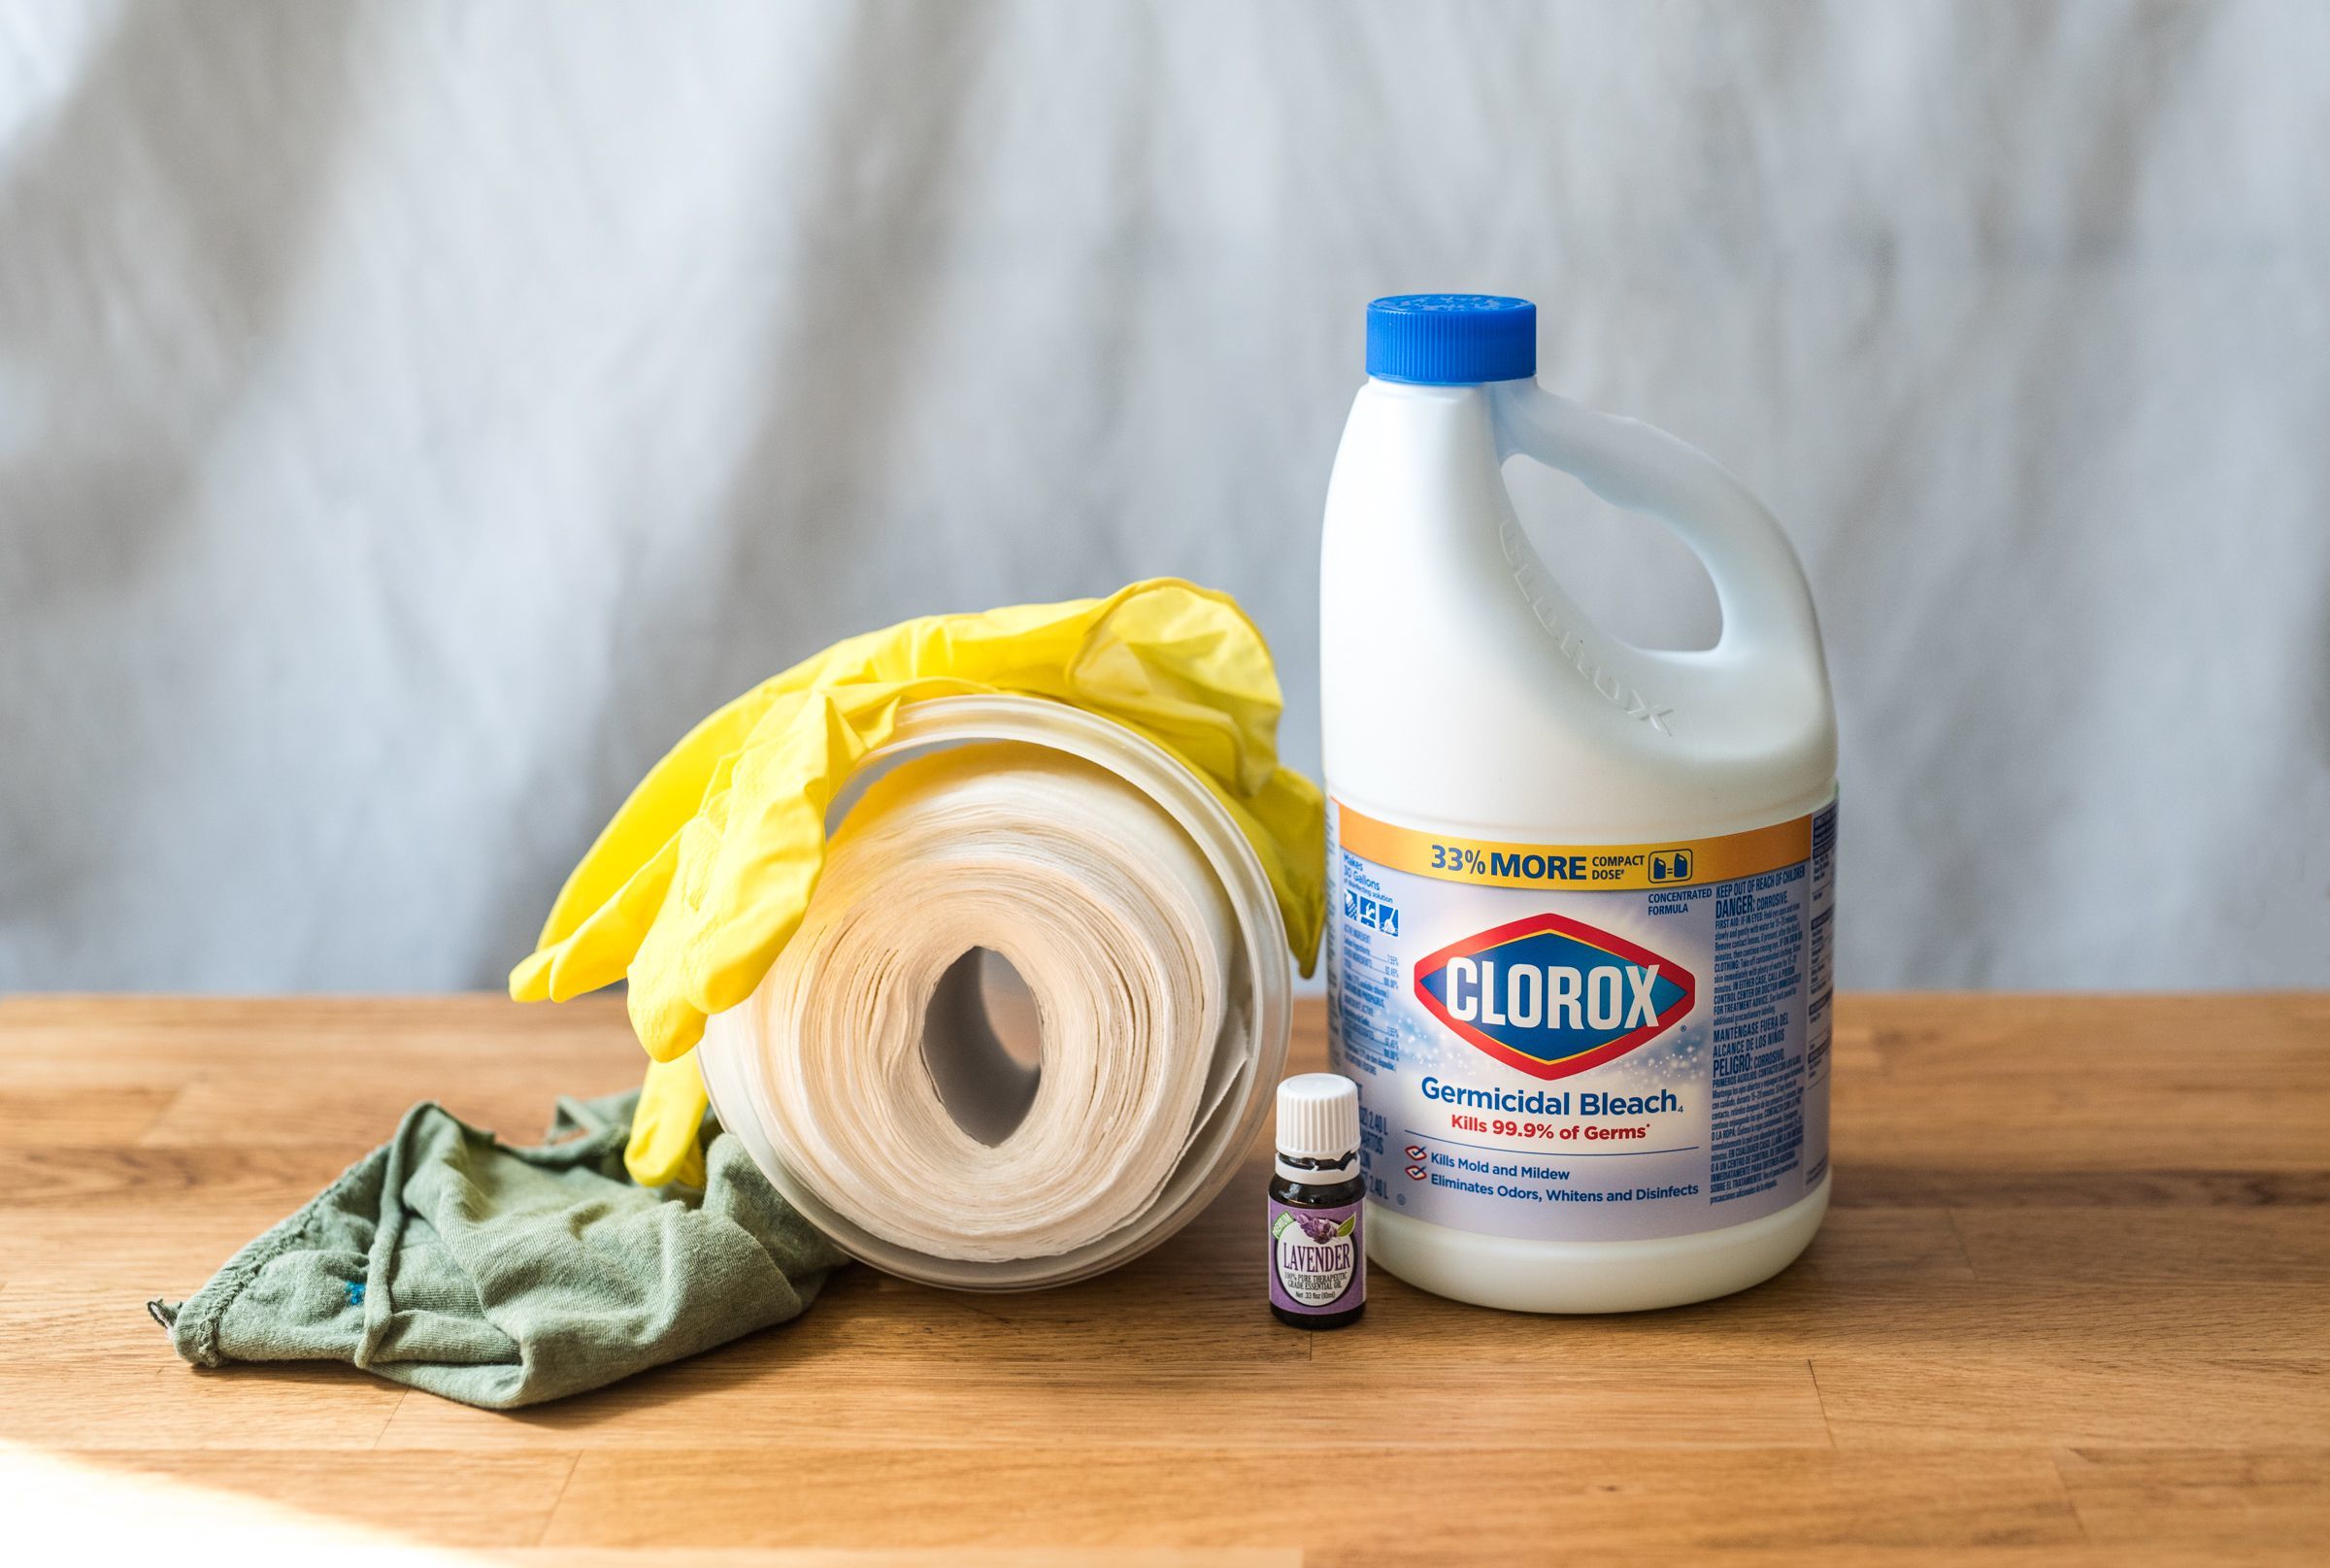 How to Make Disinfectant Wipes with Bleach